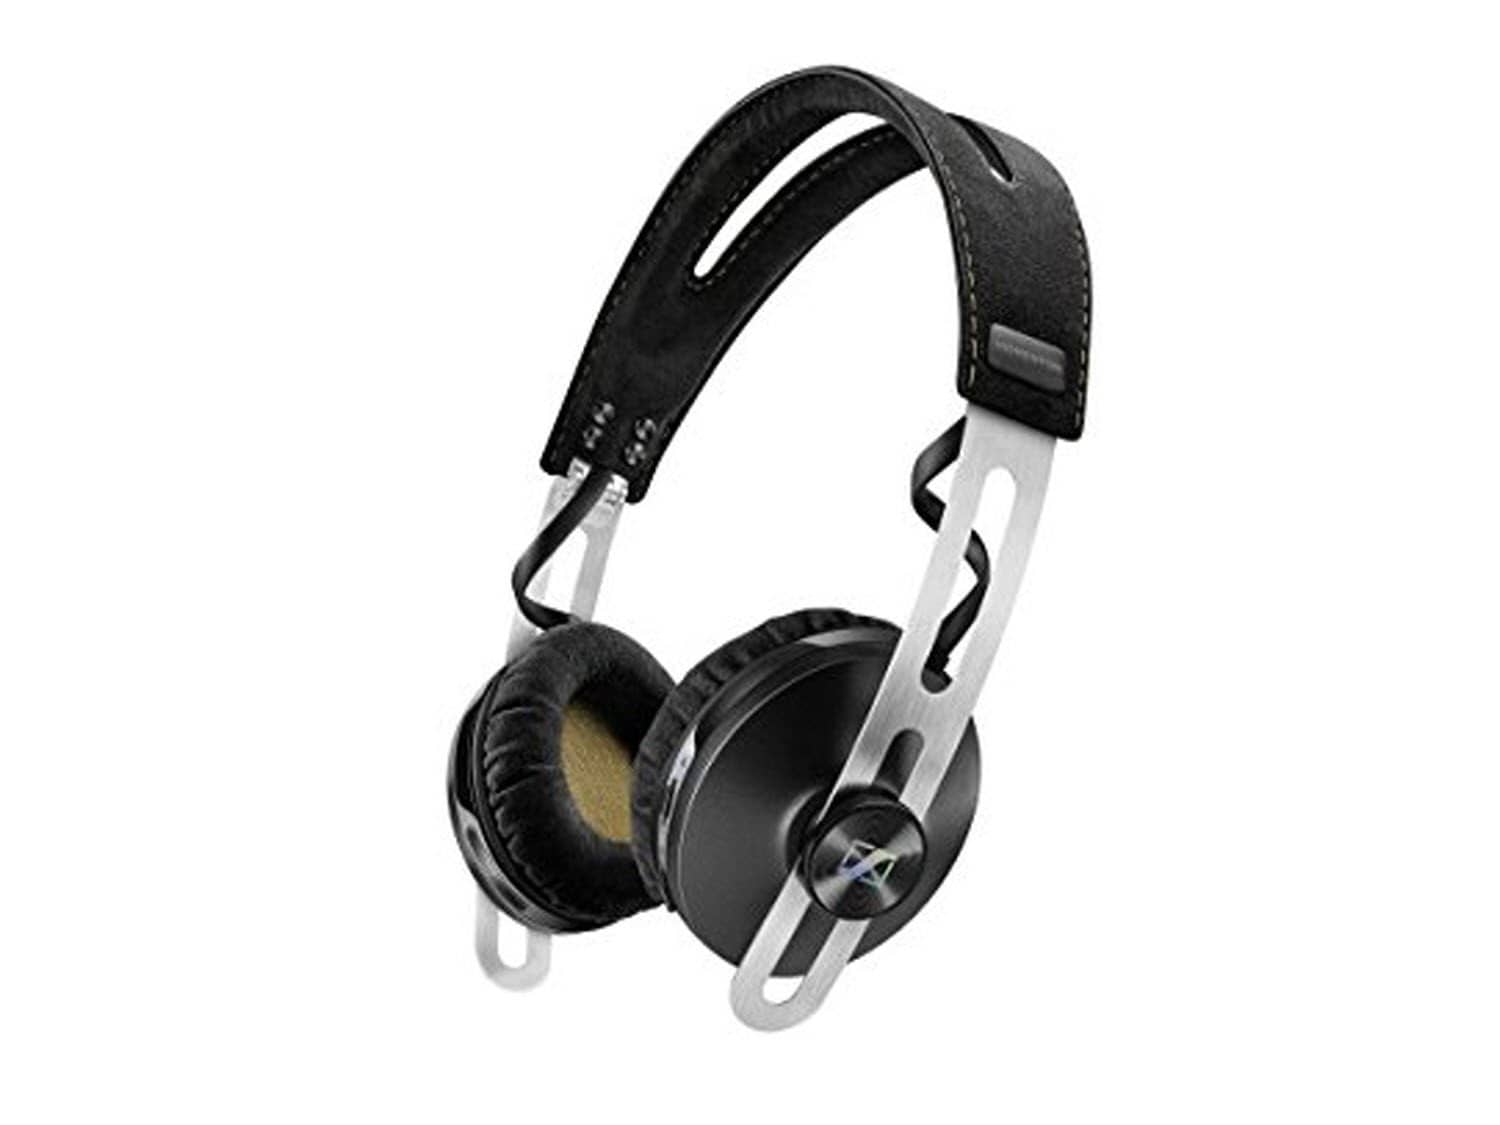 Sennheiser Momentum 2.0 On-Ear Wireless with Active Noise Cancellation - Black